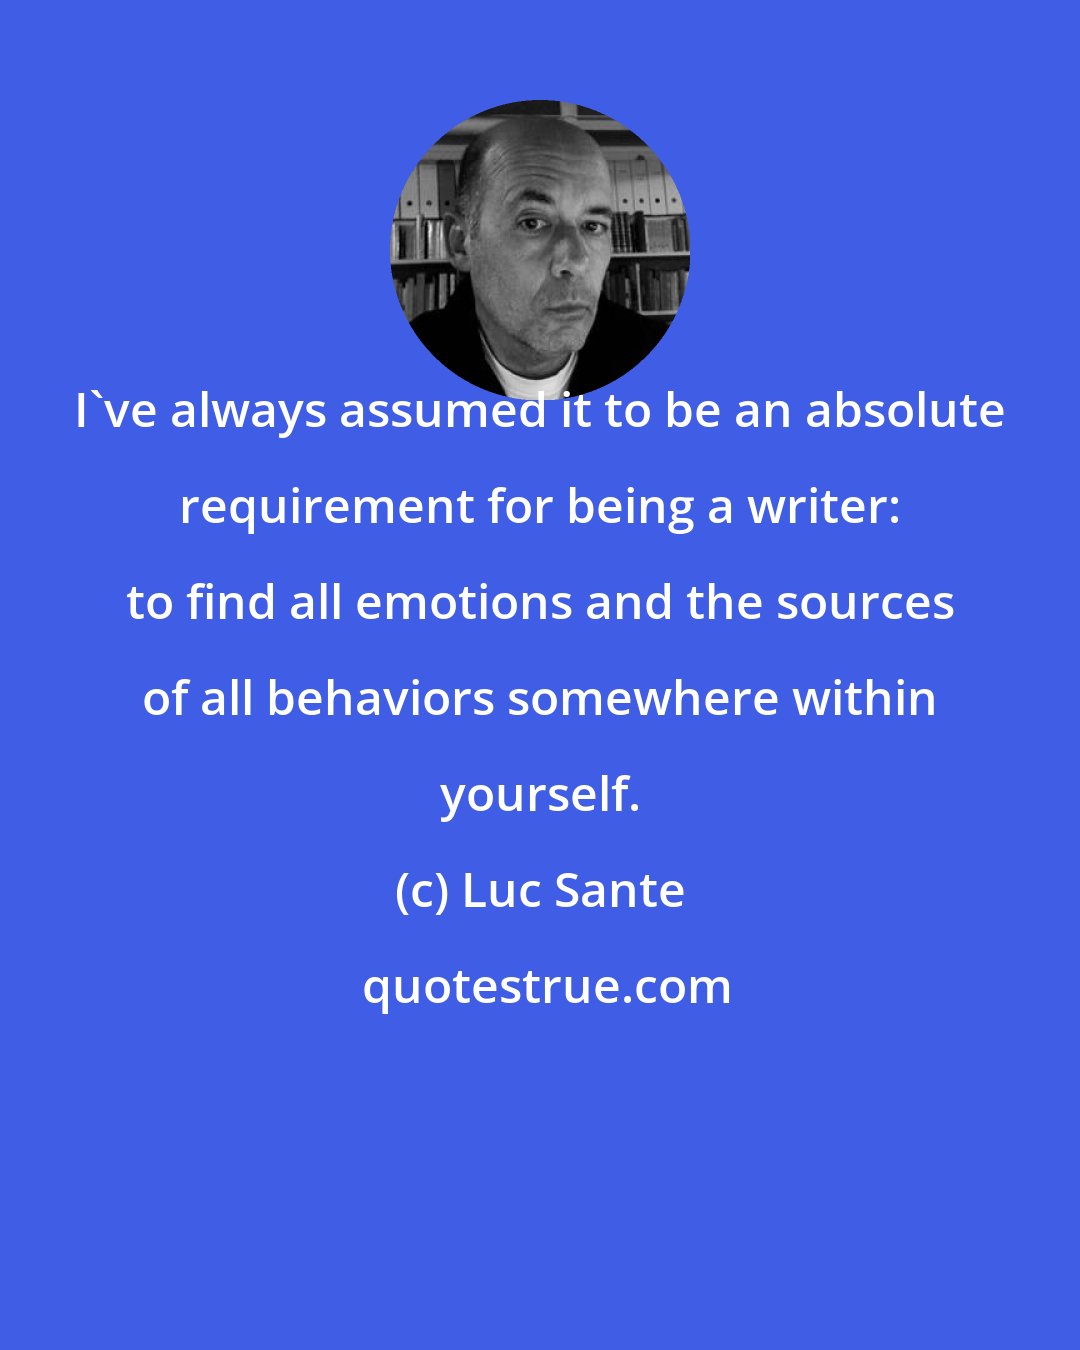 Luc Sante: I've always assumed it to be an absolute requirement for being a writer: to find all emotions and the sources of all behaviors somewhere within yourself.